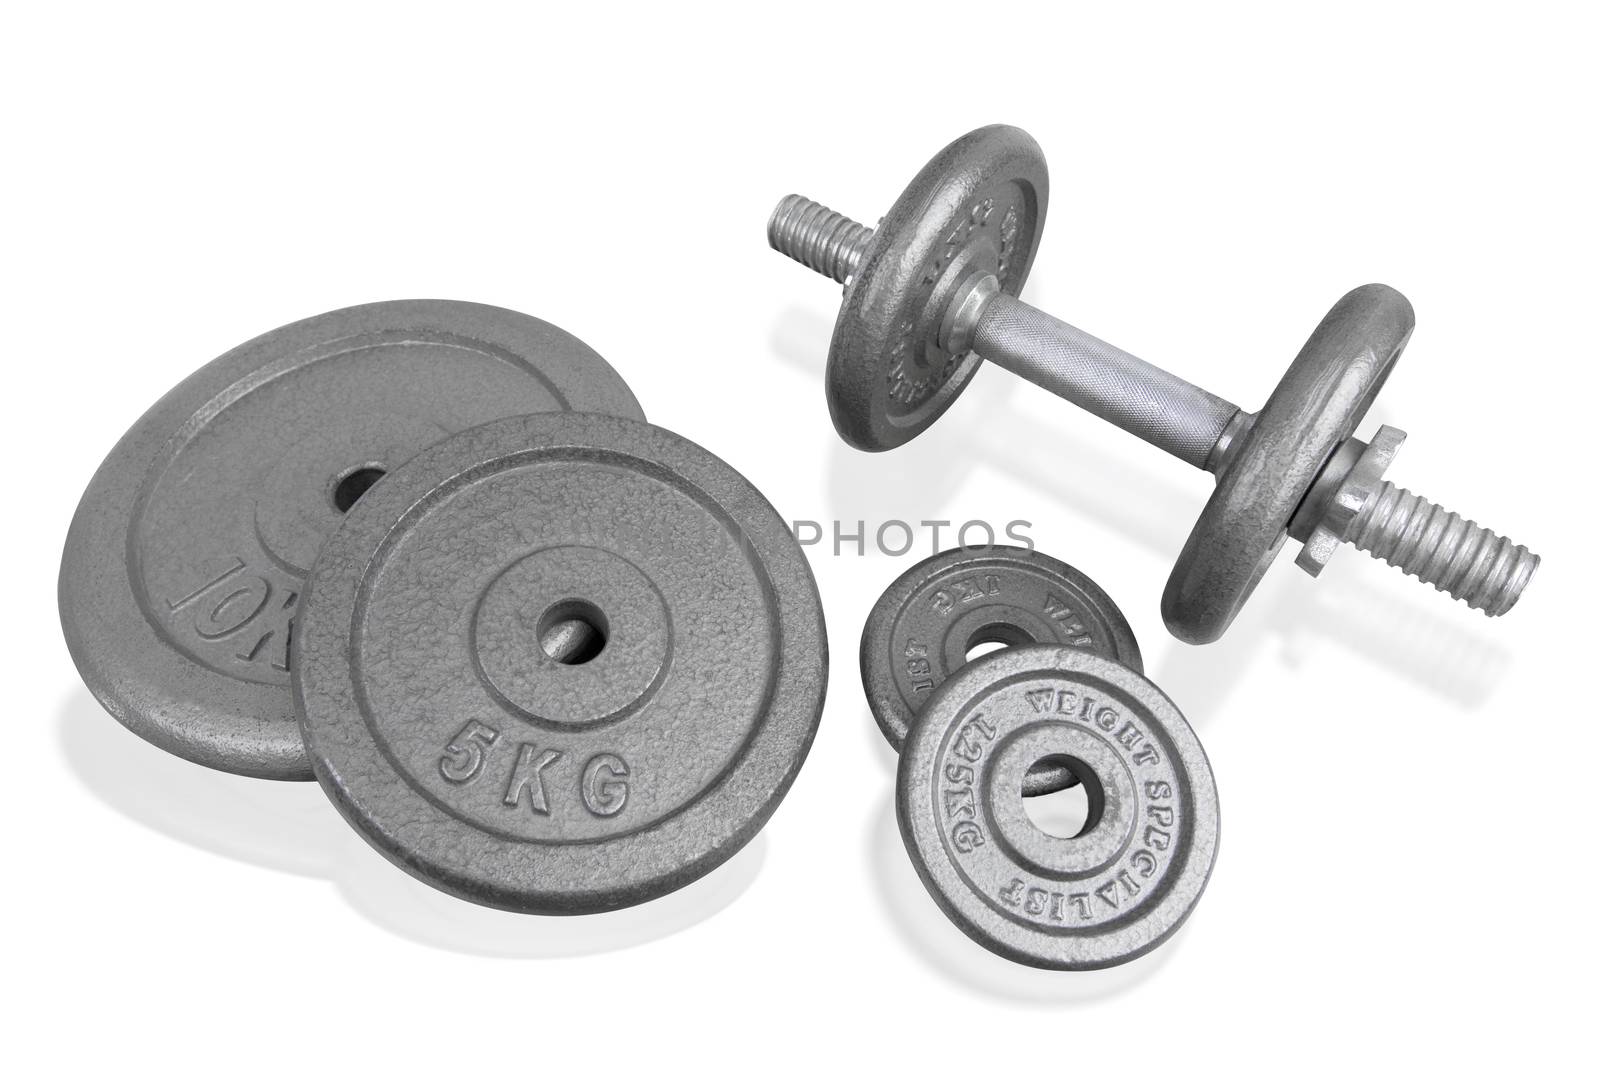 Fitness exercise equipment silver dumbbell and weights plate iso by jayzynism